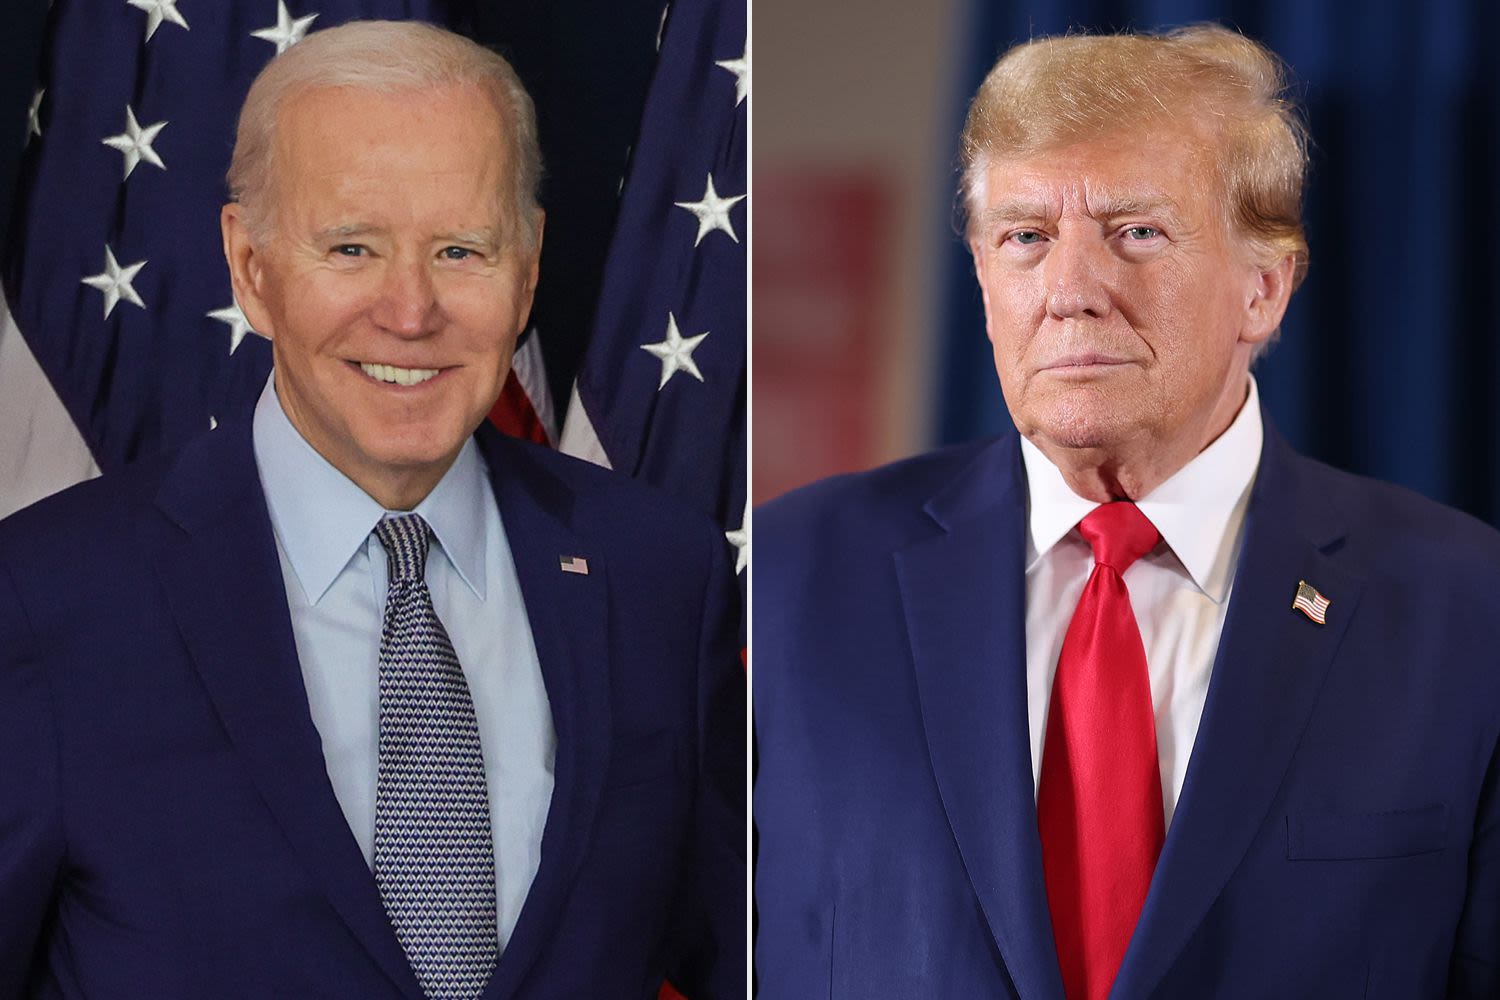 How to Watch the First Presidential Debate Between Joe Biden and Donald Trump — and What to Expect